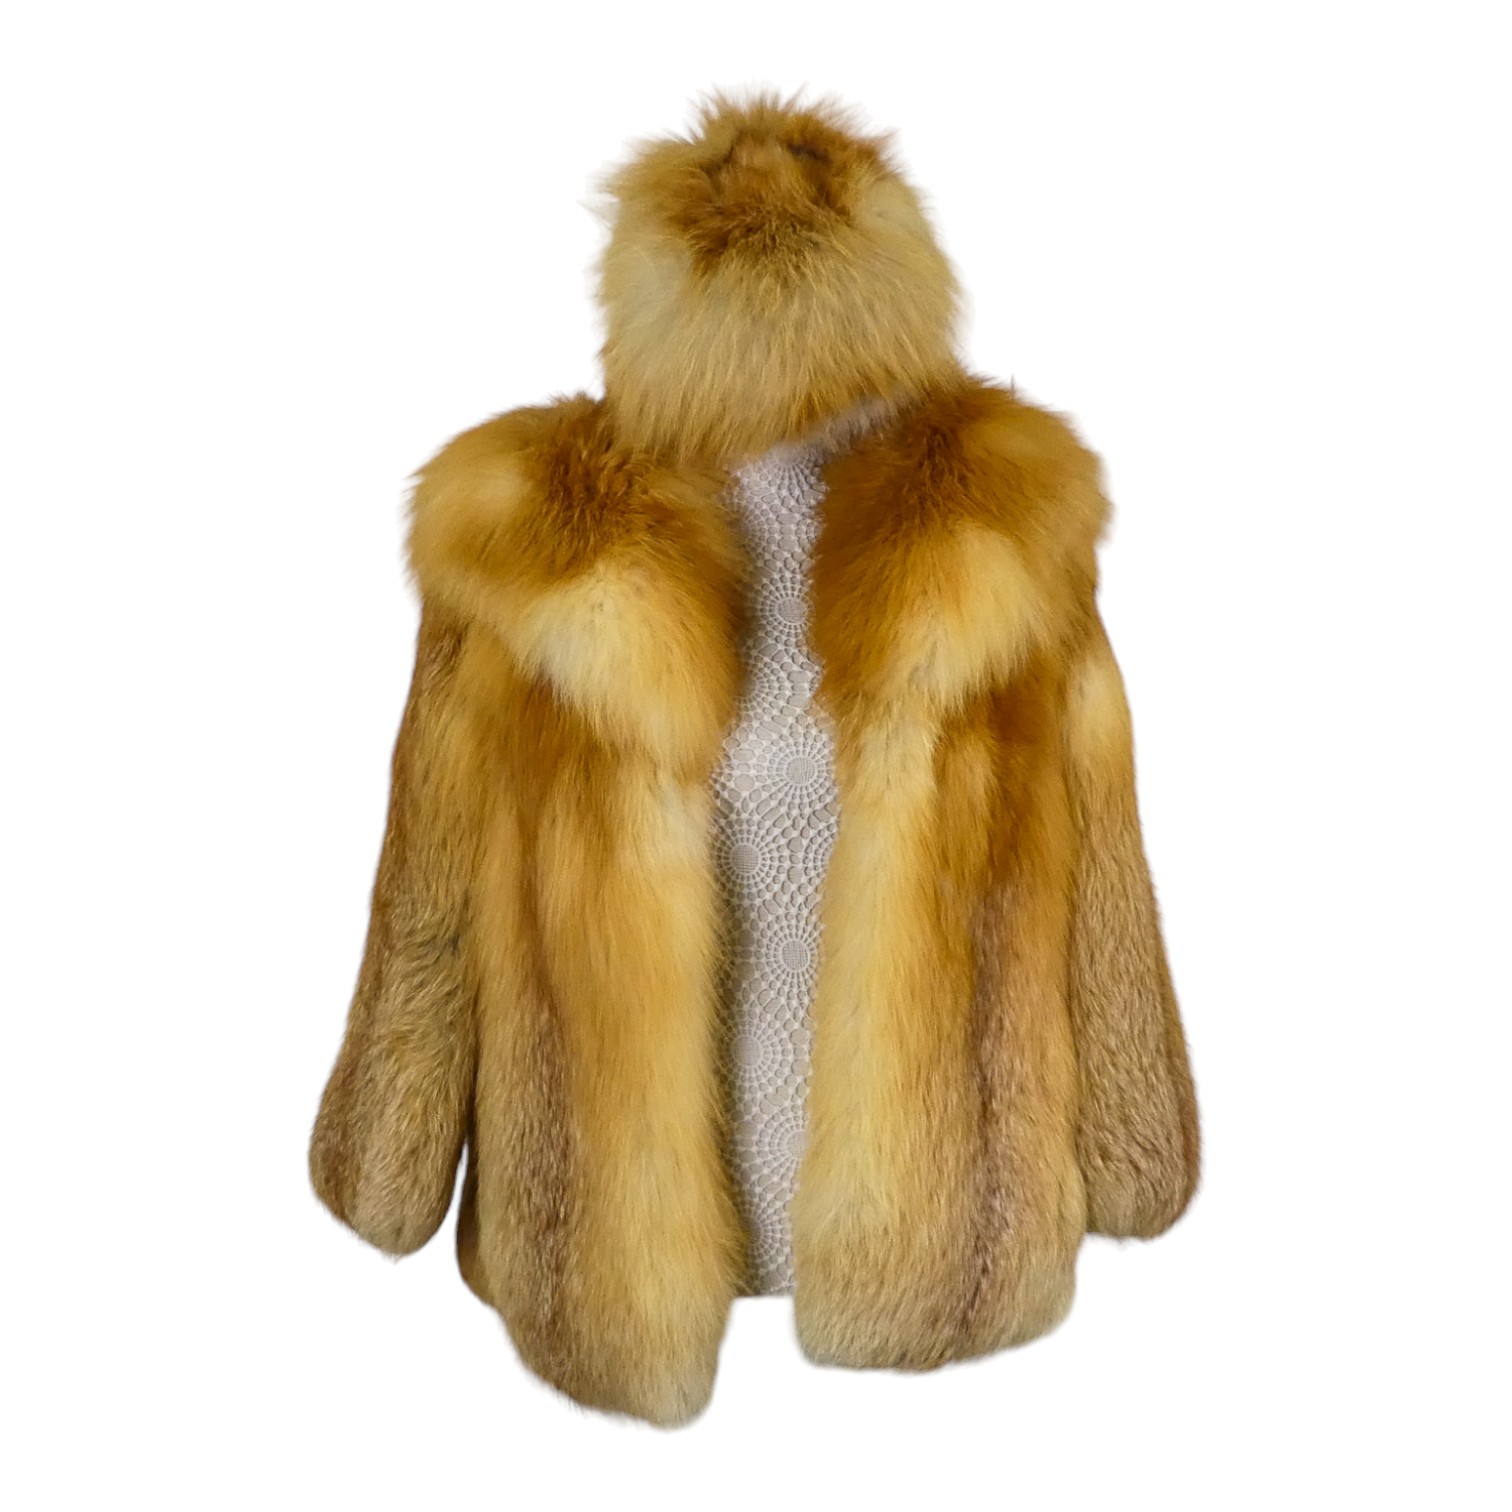 A ladies fox fur coat - the short jacket, 64cm long, together with a hat